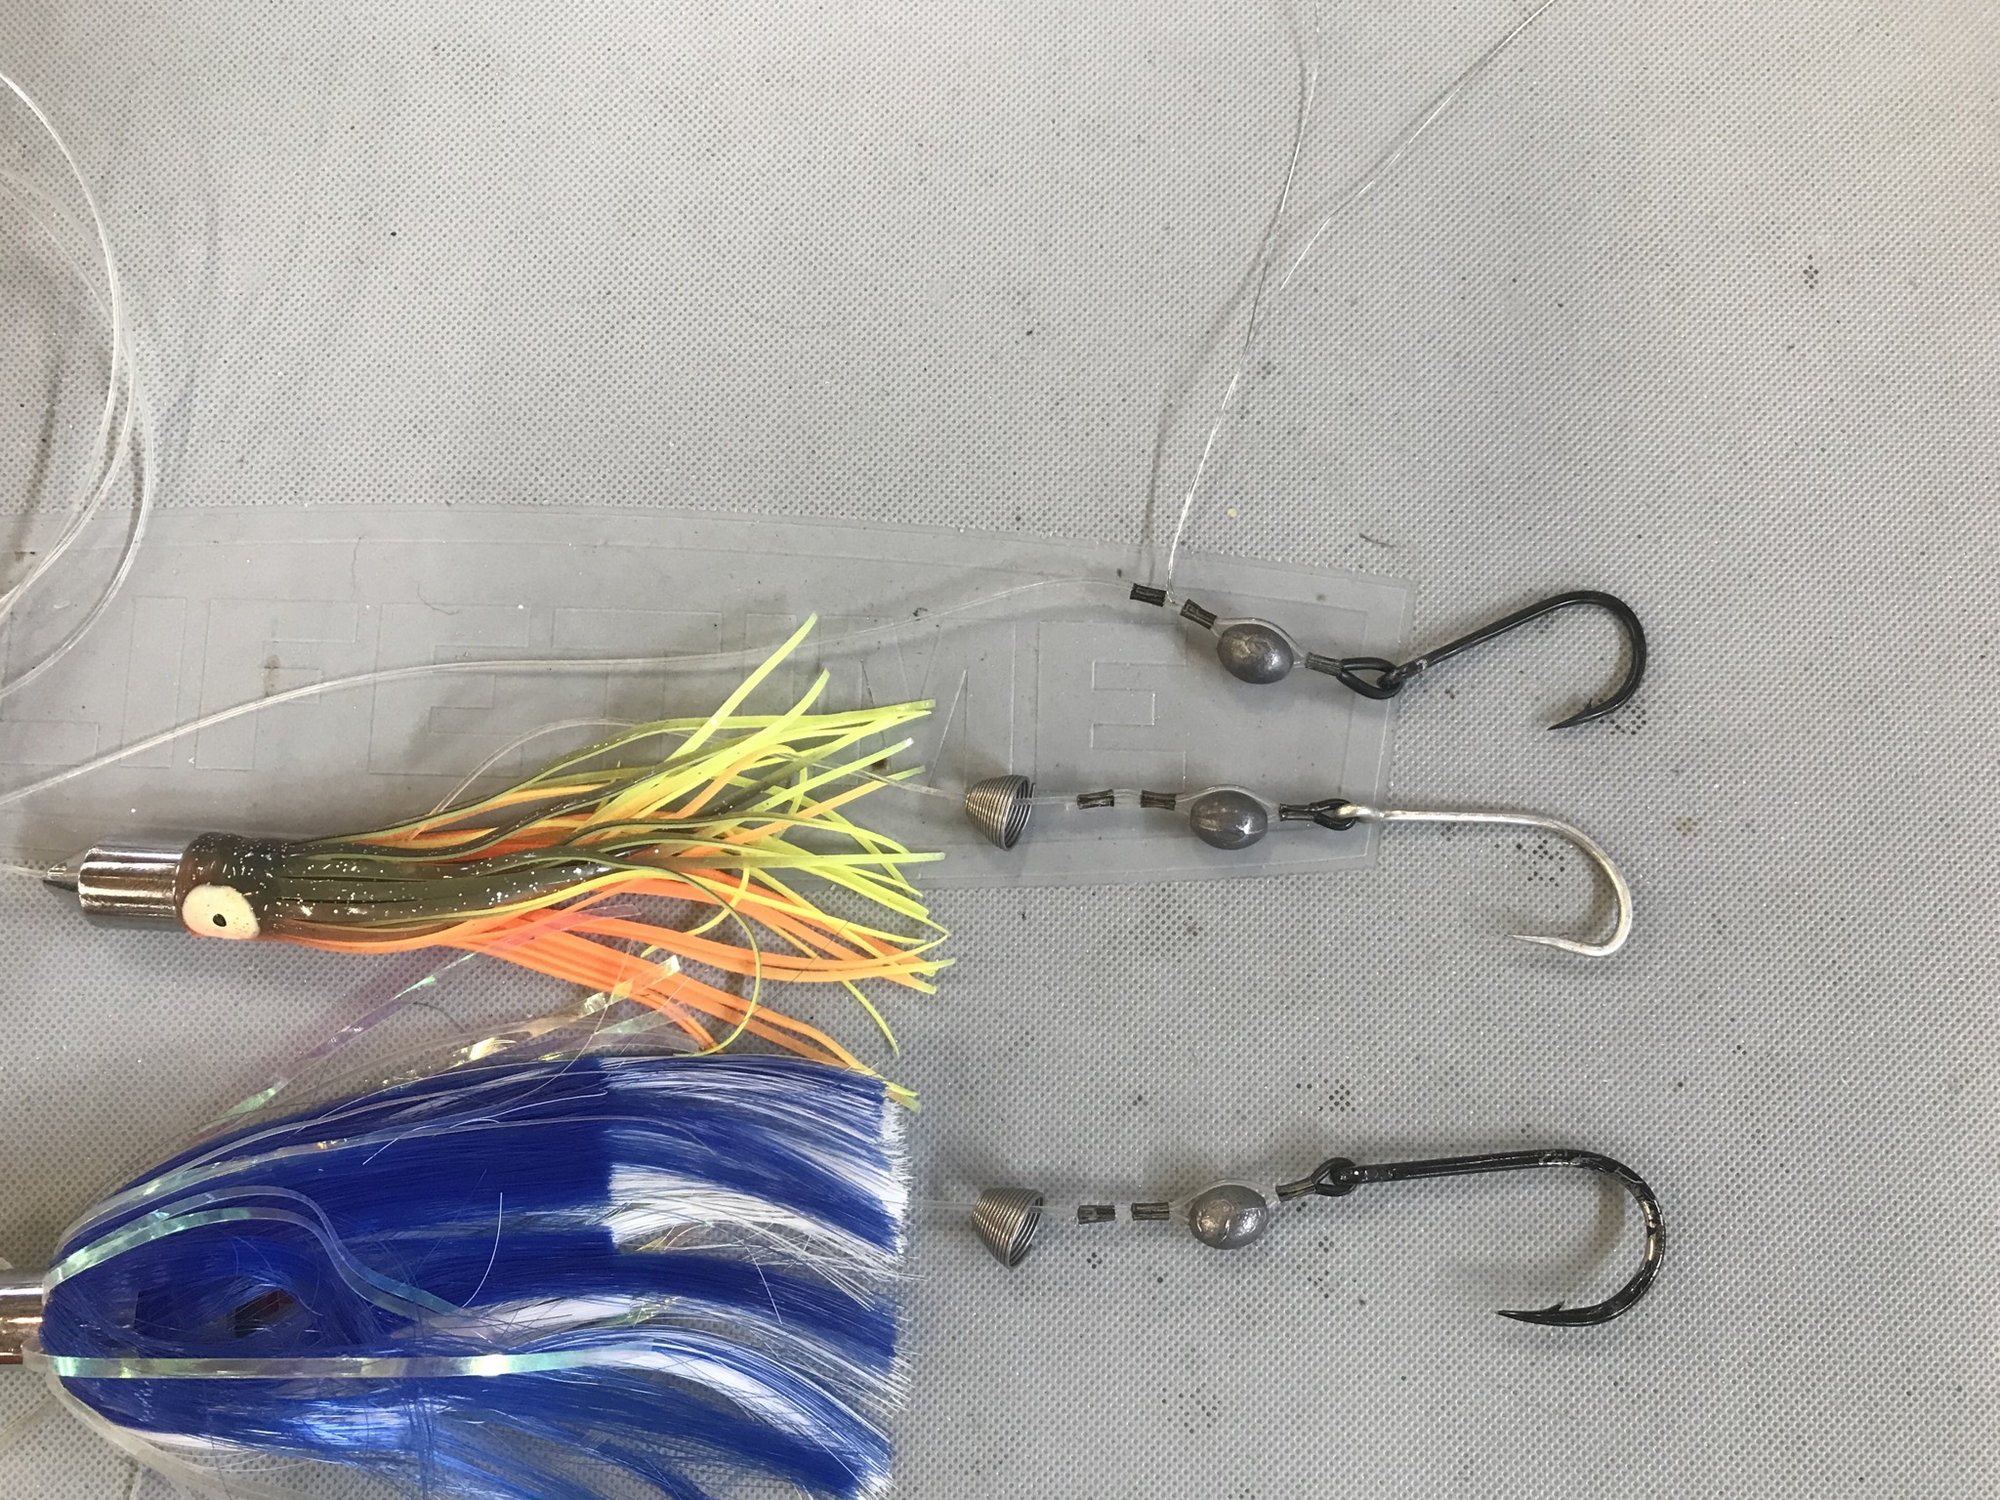 What Is Your Thru Wire Made Of? - Hard Baits -  -  Tackle Building Forums